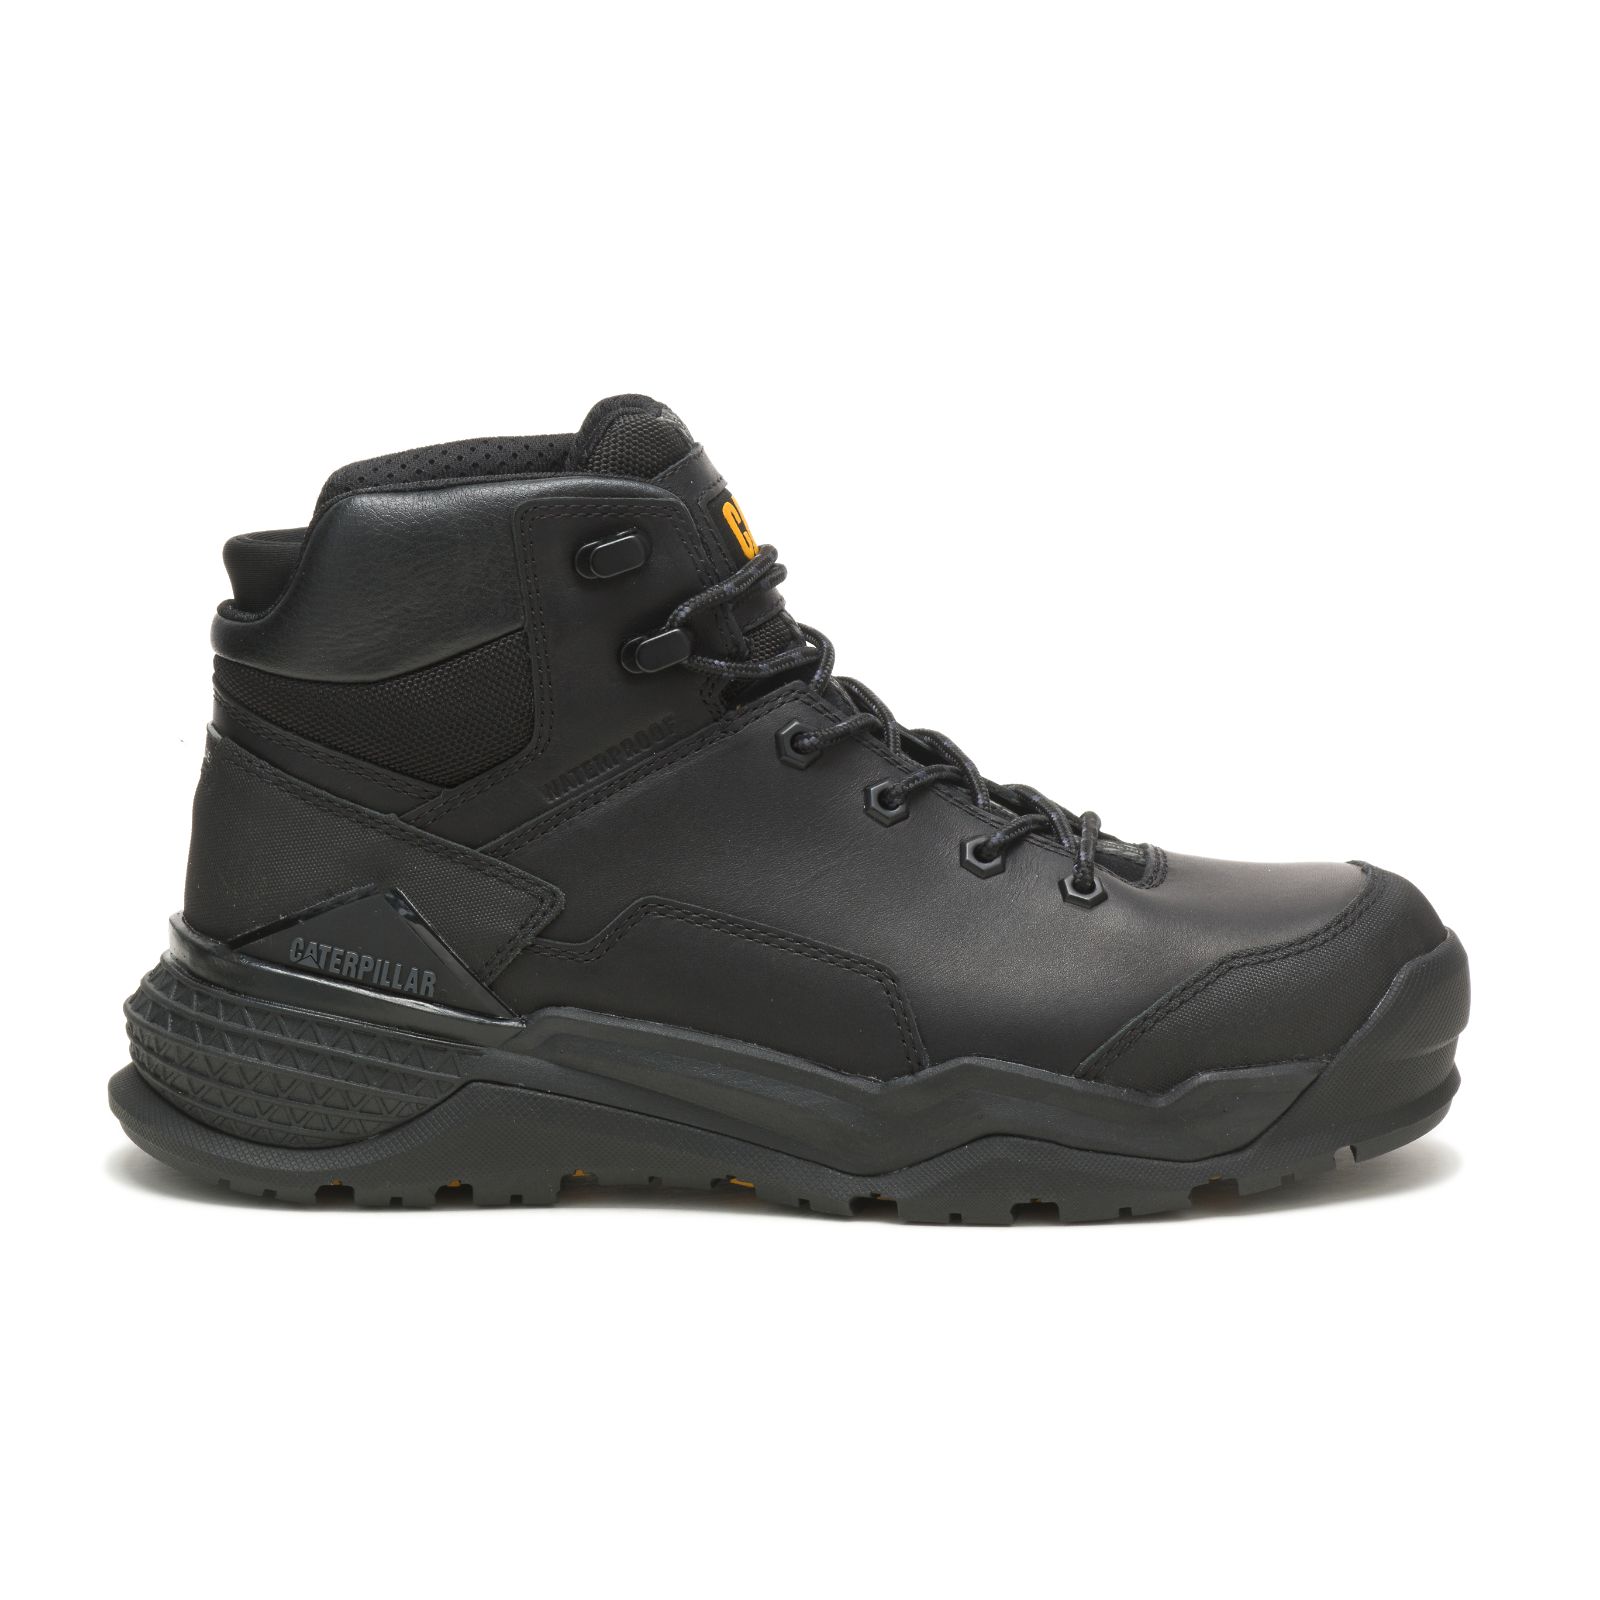 Caterpillar Provoke Mid Waterproof Alloy Toe Philippines - Mens Work Boots - Black 30495GFRO